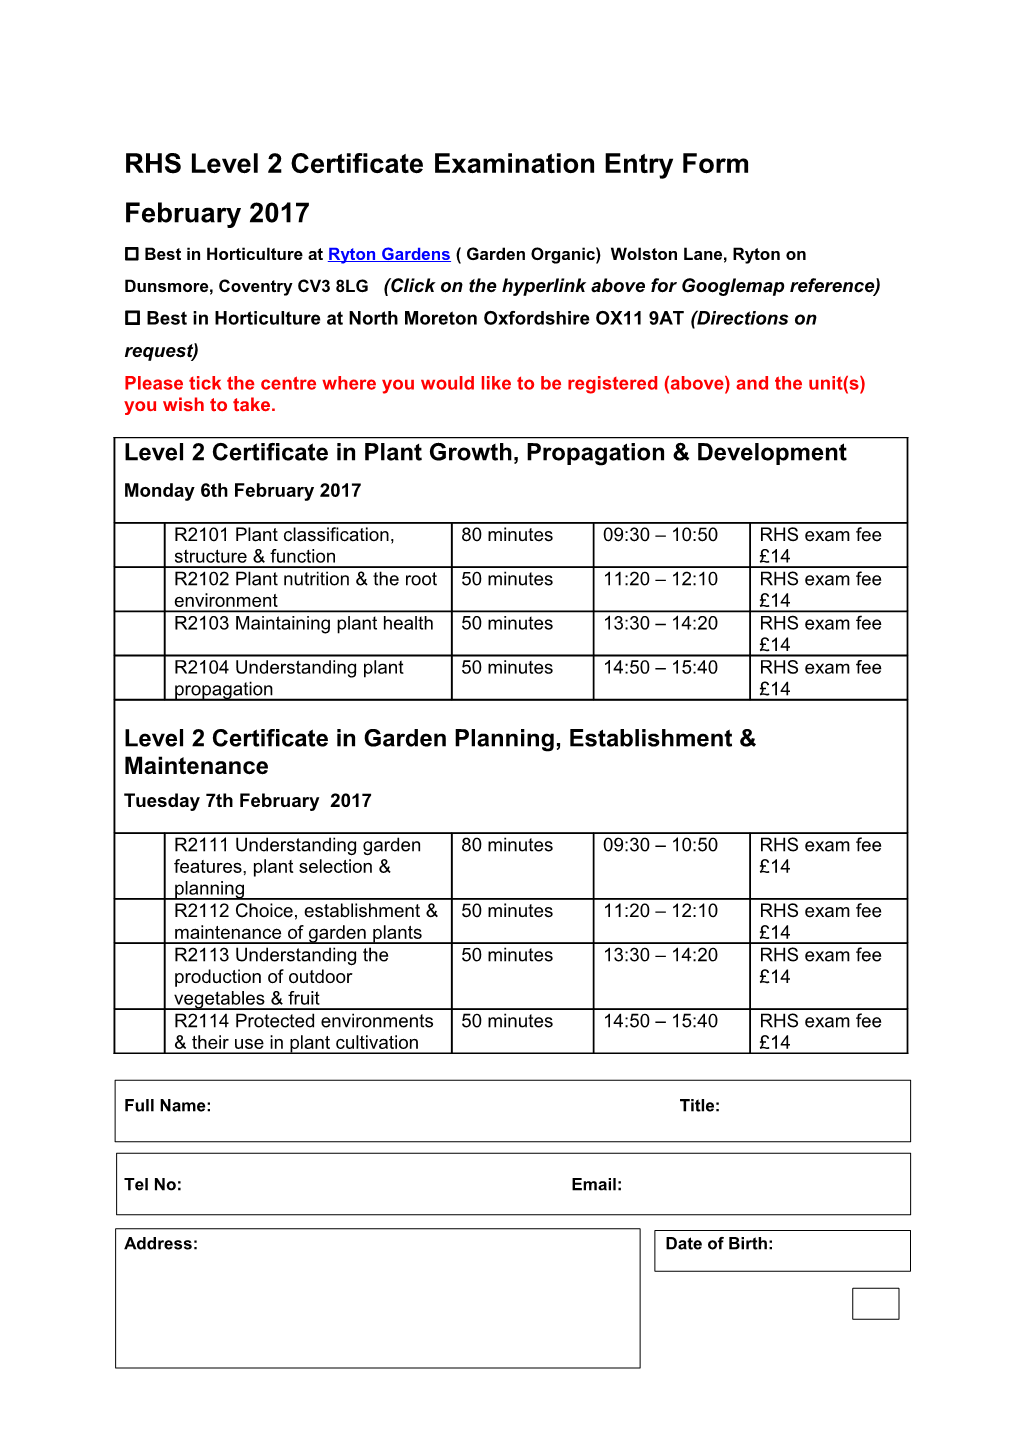 RHS Level 2 Certificateexamination Entry Form